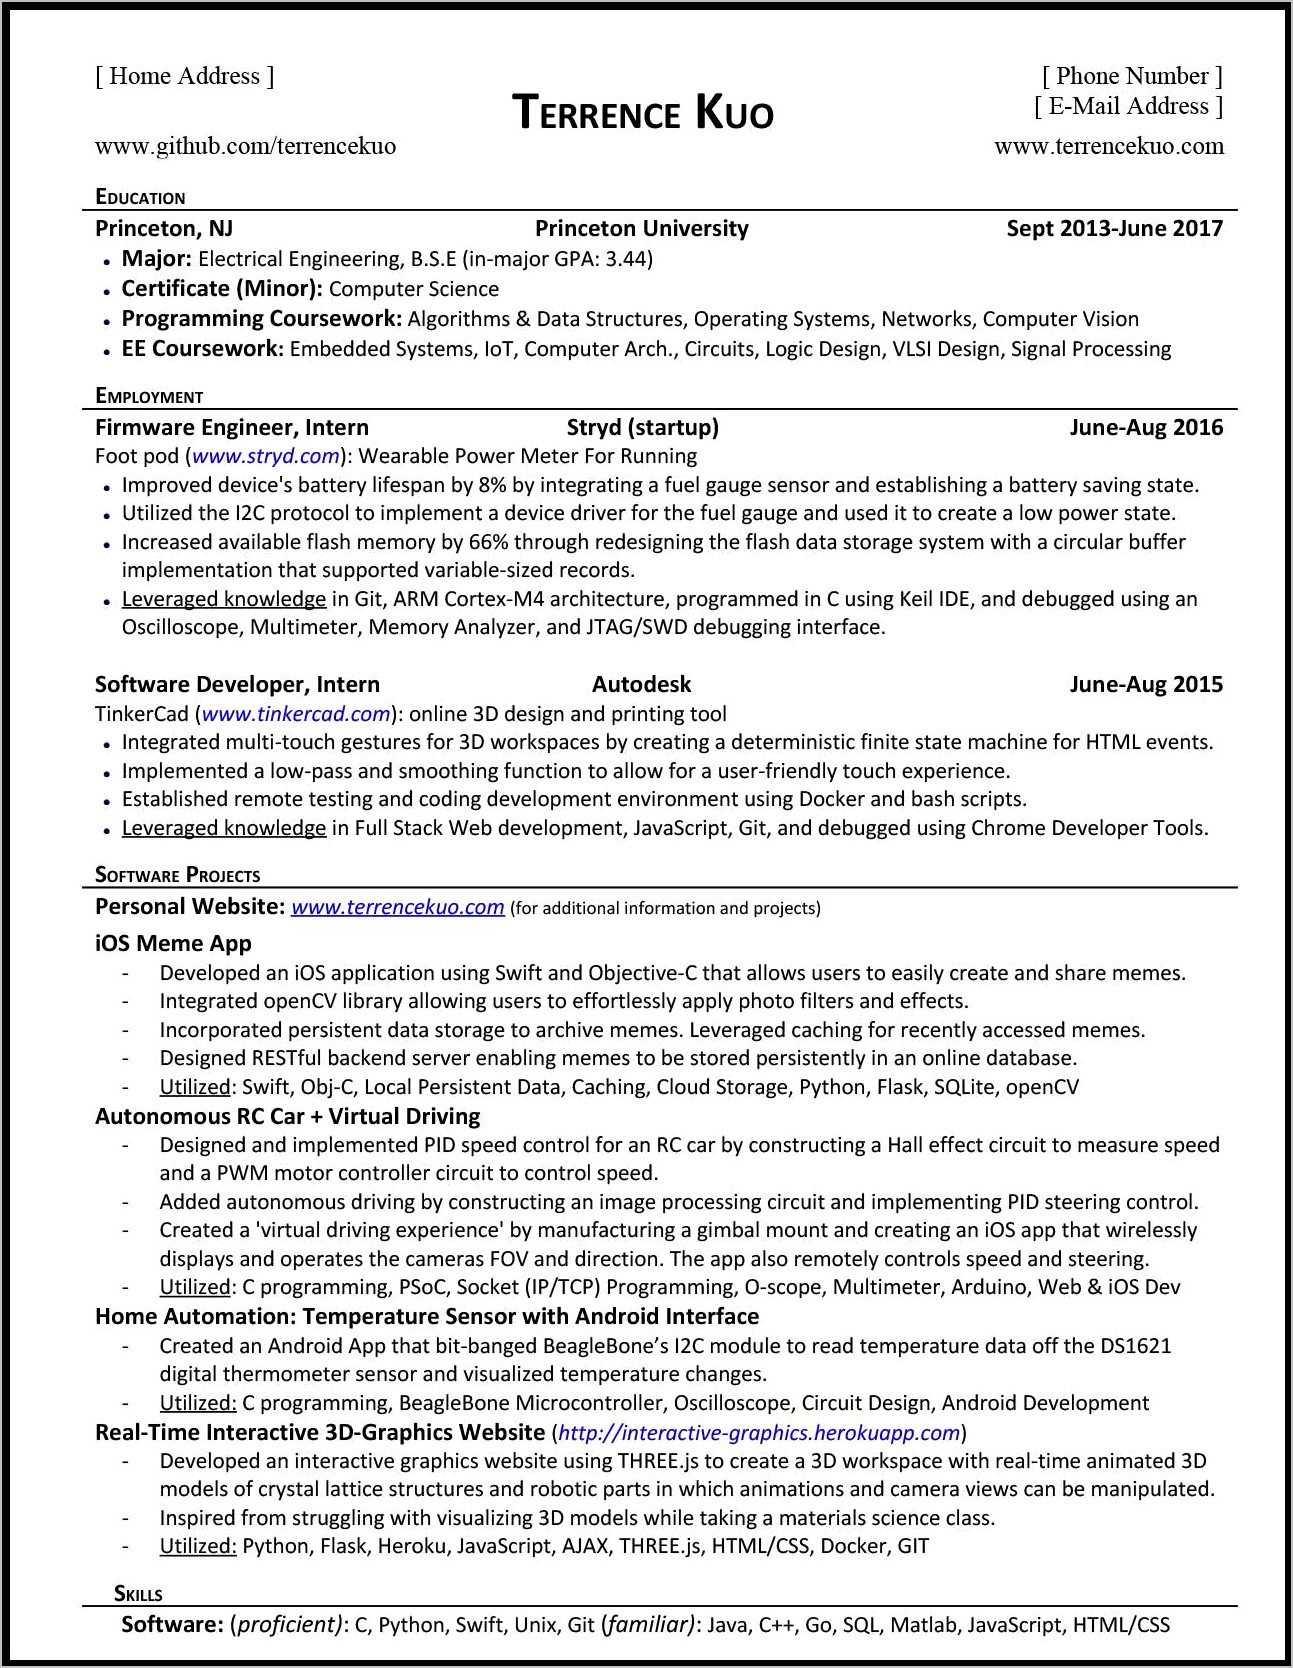 Skills Section Of Resume Engineering College